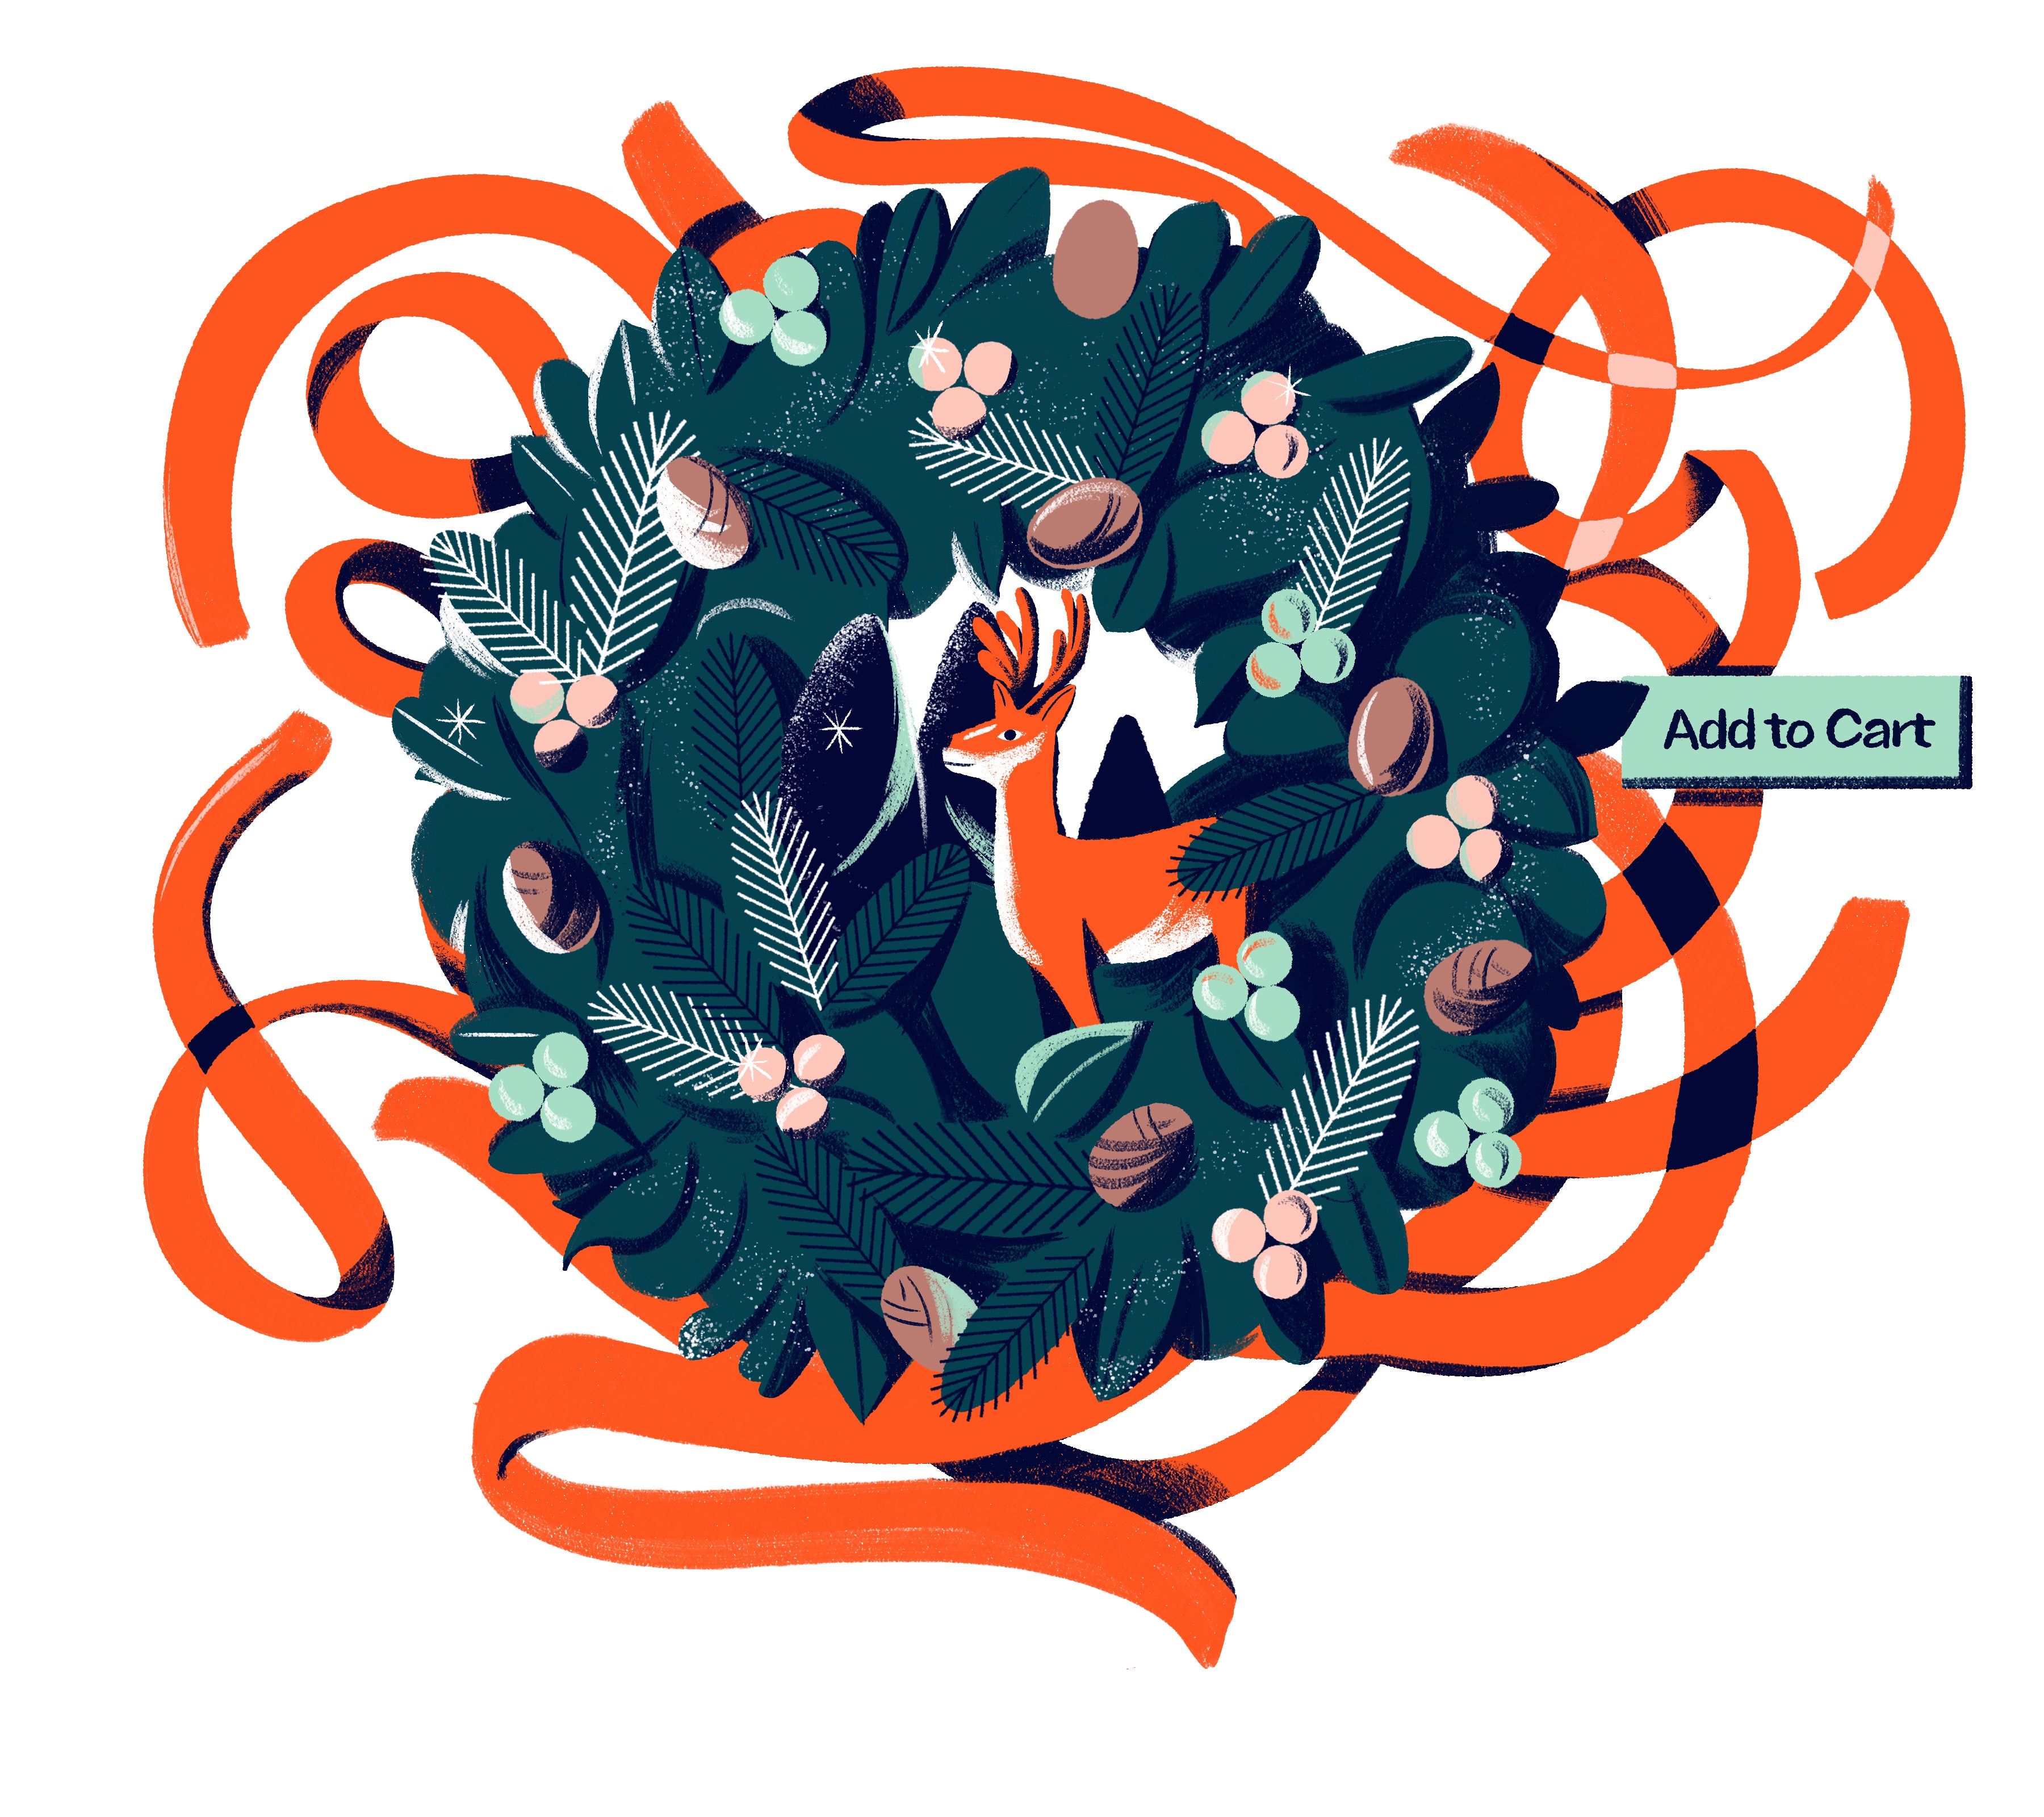 Illustration of a Christmas wreath adorned with red ribbon and a miniature reindeer. A tag says "Add to cart."